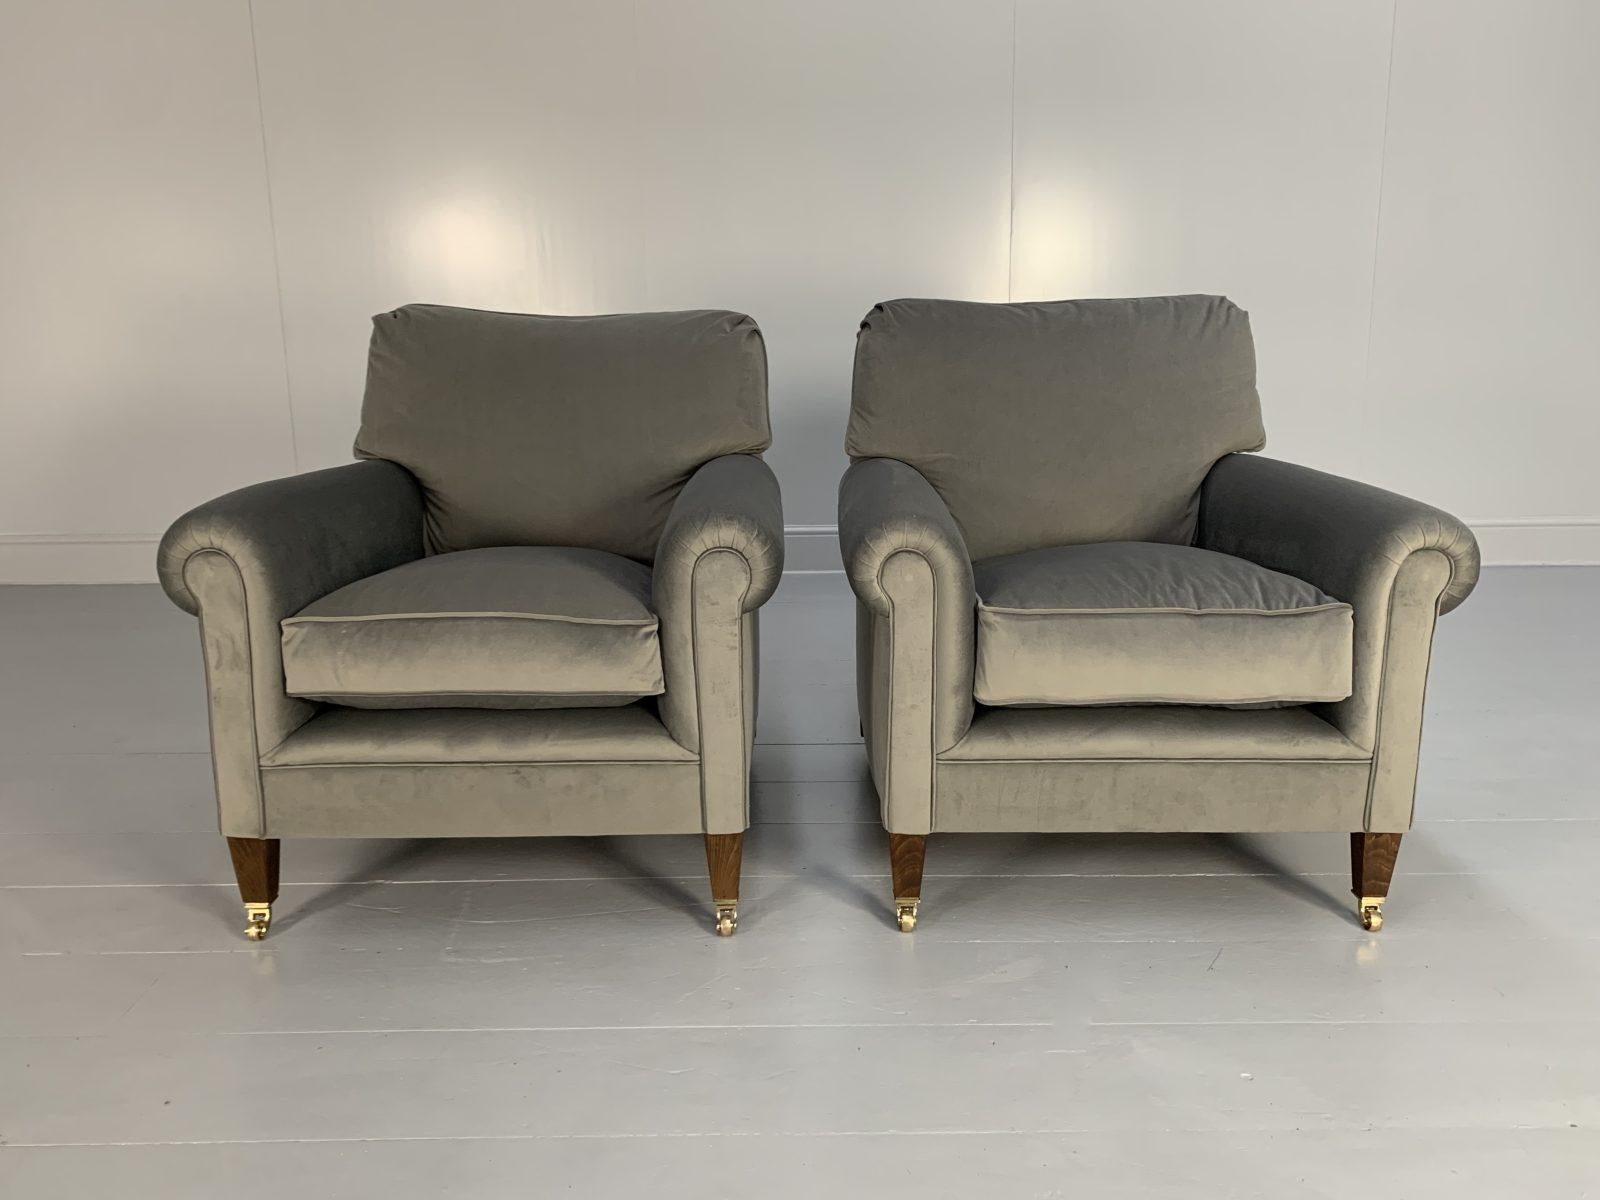 Contemporary Pair of George Smith “Signature” Armchairs, in Pale Grey Ralph Lauren Velvet